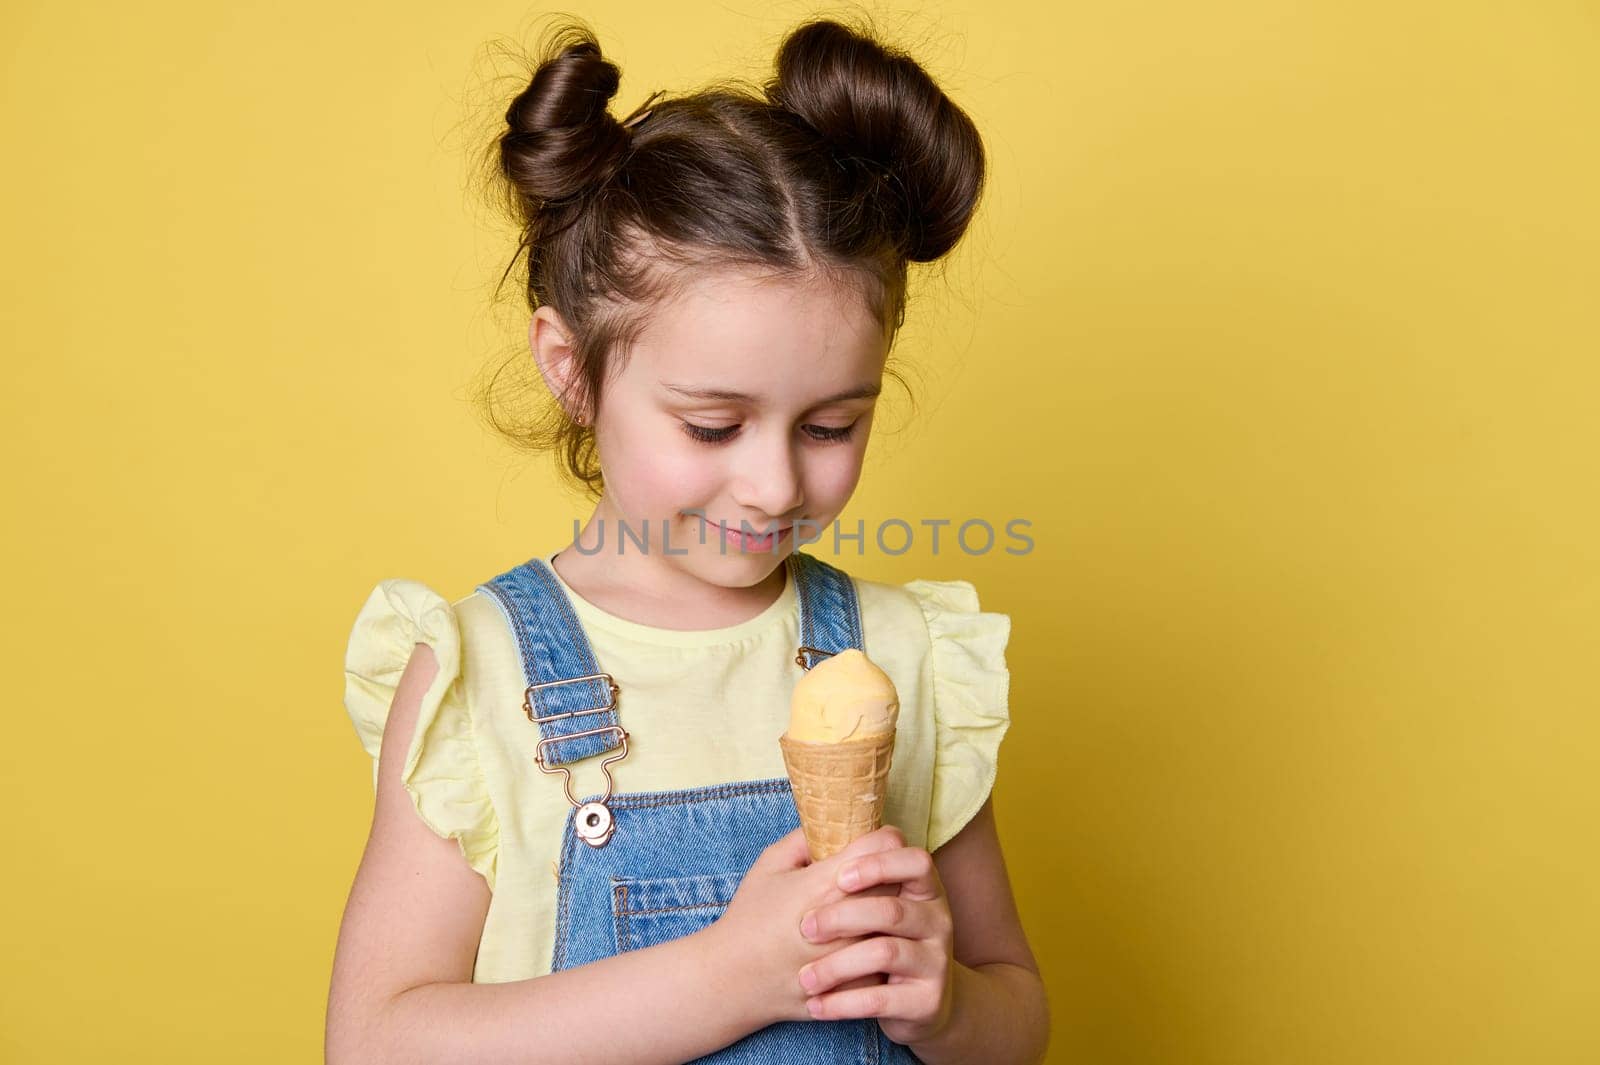 Happy little girl with stylish hairstyle, wearing blue denim overalls and yellow t-shirt, enjoying sweet summer dessert, holding waffle cone with ice cream scoop, smiling isolated on yellow background